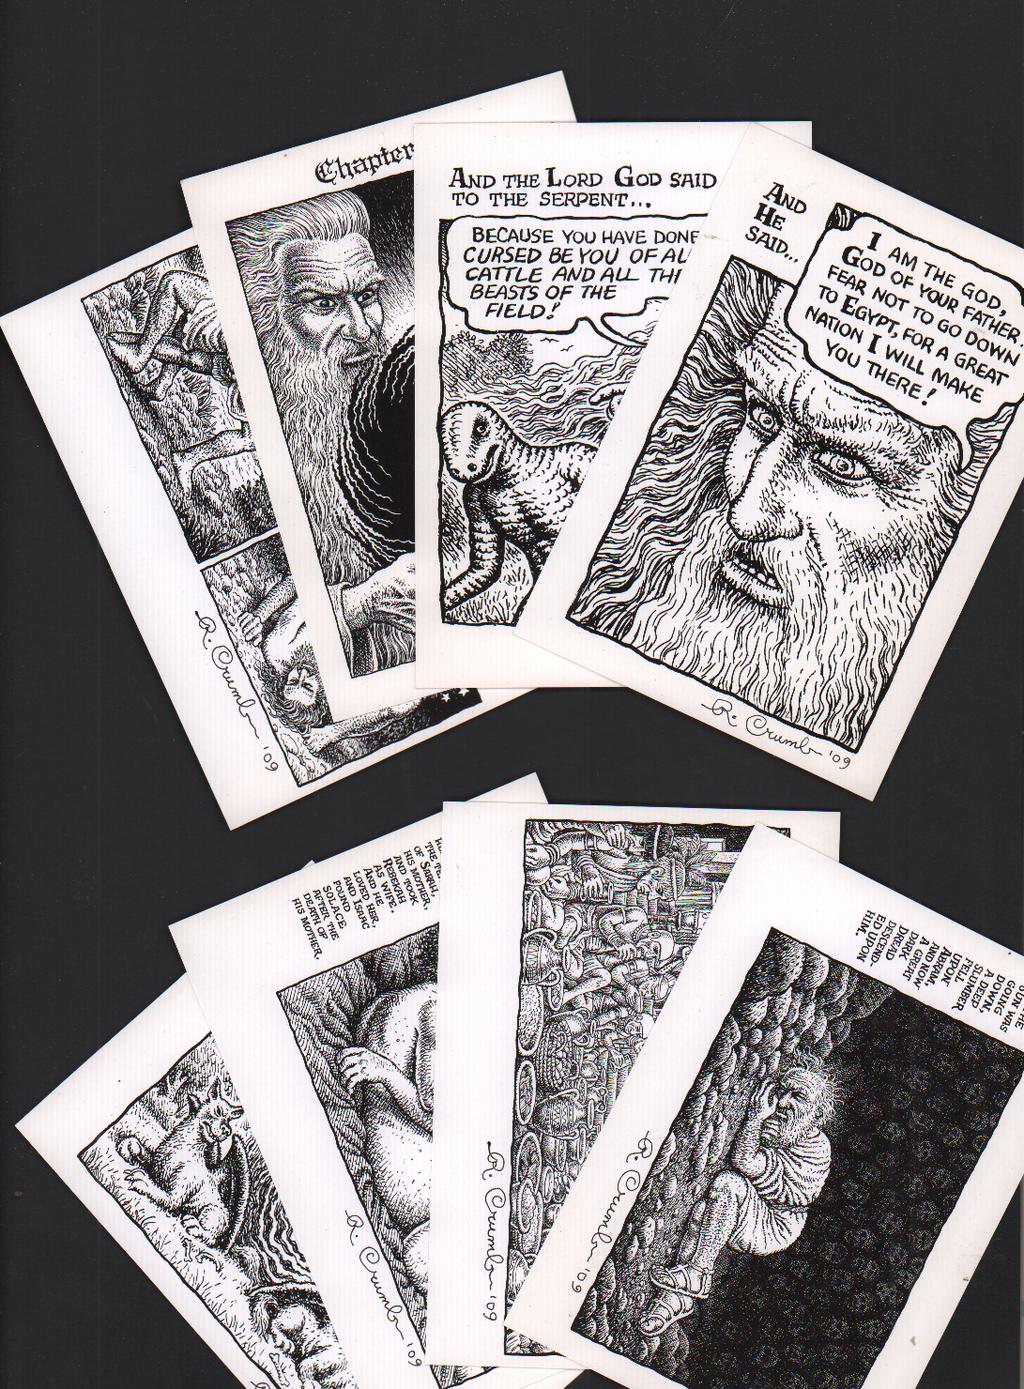 (13) Crumb, R. [SET OF 8 BOOK OF GENESIS POSTCARDS] Los Angeles: Hammer Museum, 2009. Set of eight different glossy B&W postcards [15 cm x 10.5 cm]. Fine.